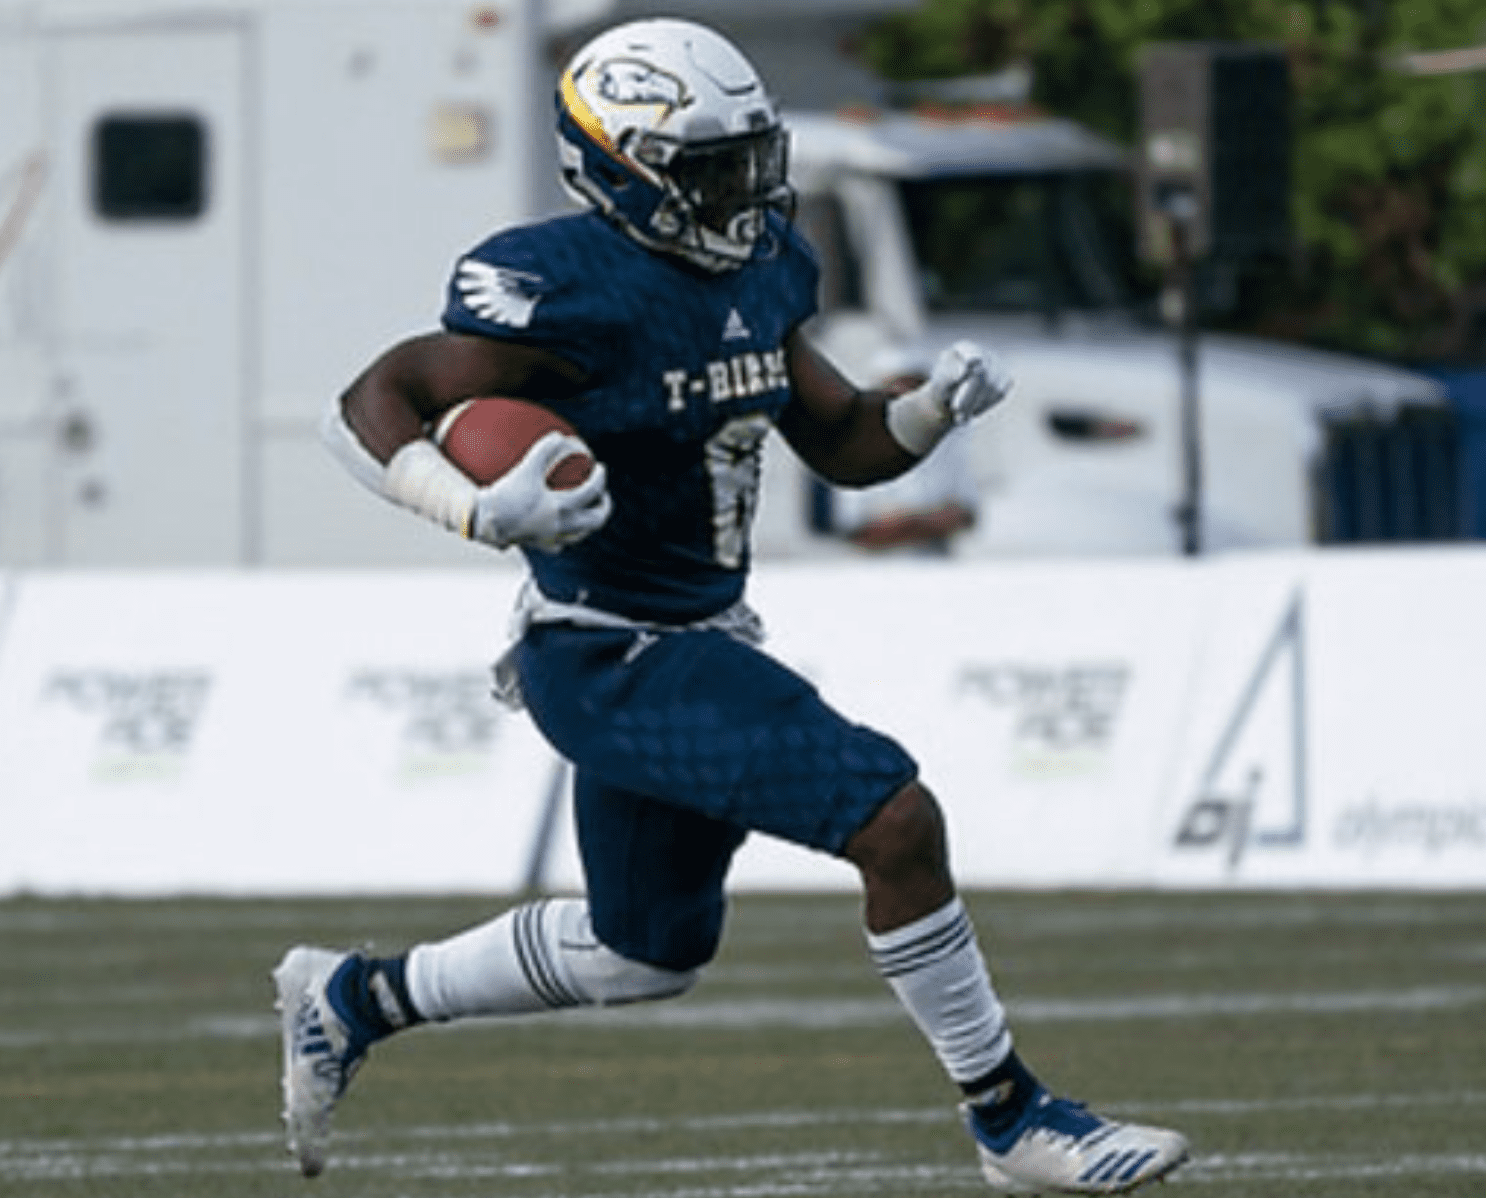 Ted Kubongo the fast and elusive running back from the University of British Columbia recently sat down with Justin Berendzen of NFL Draft Diamonds.